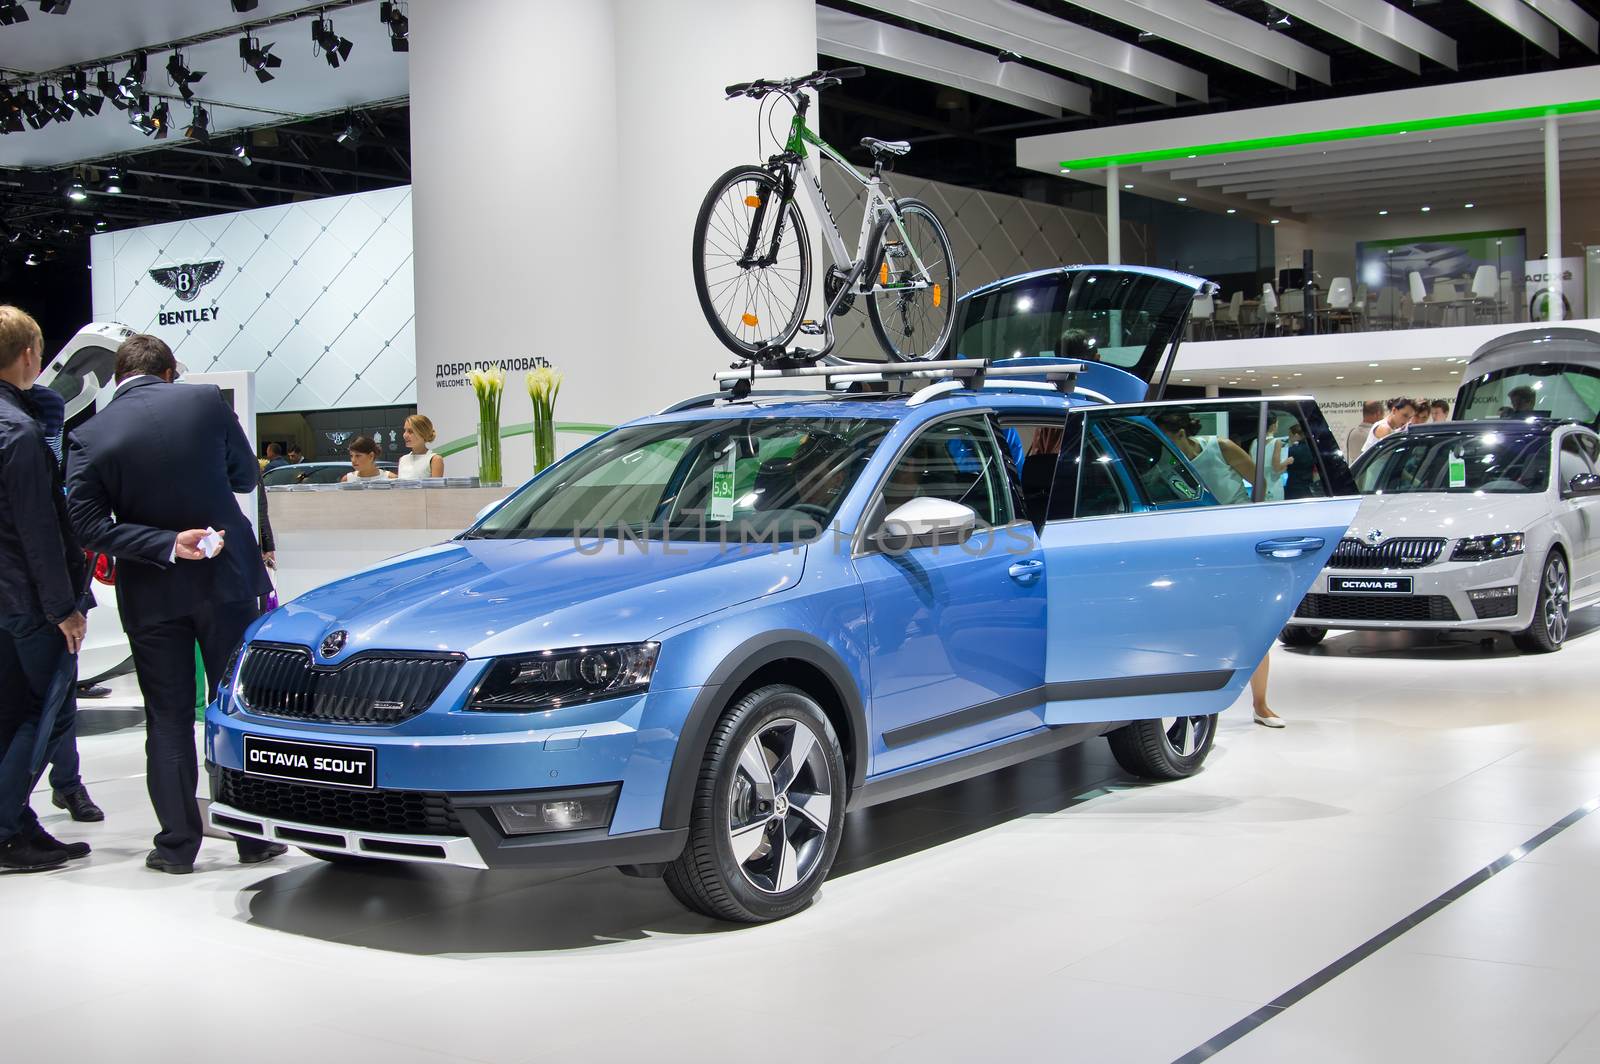 MOSCOW-SEPTEMBER 2: Skoda Octavia Scout at the Moscow International Automobile Salon on September 2, 2014 in Moscow, Russia